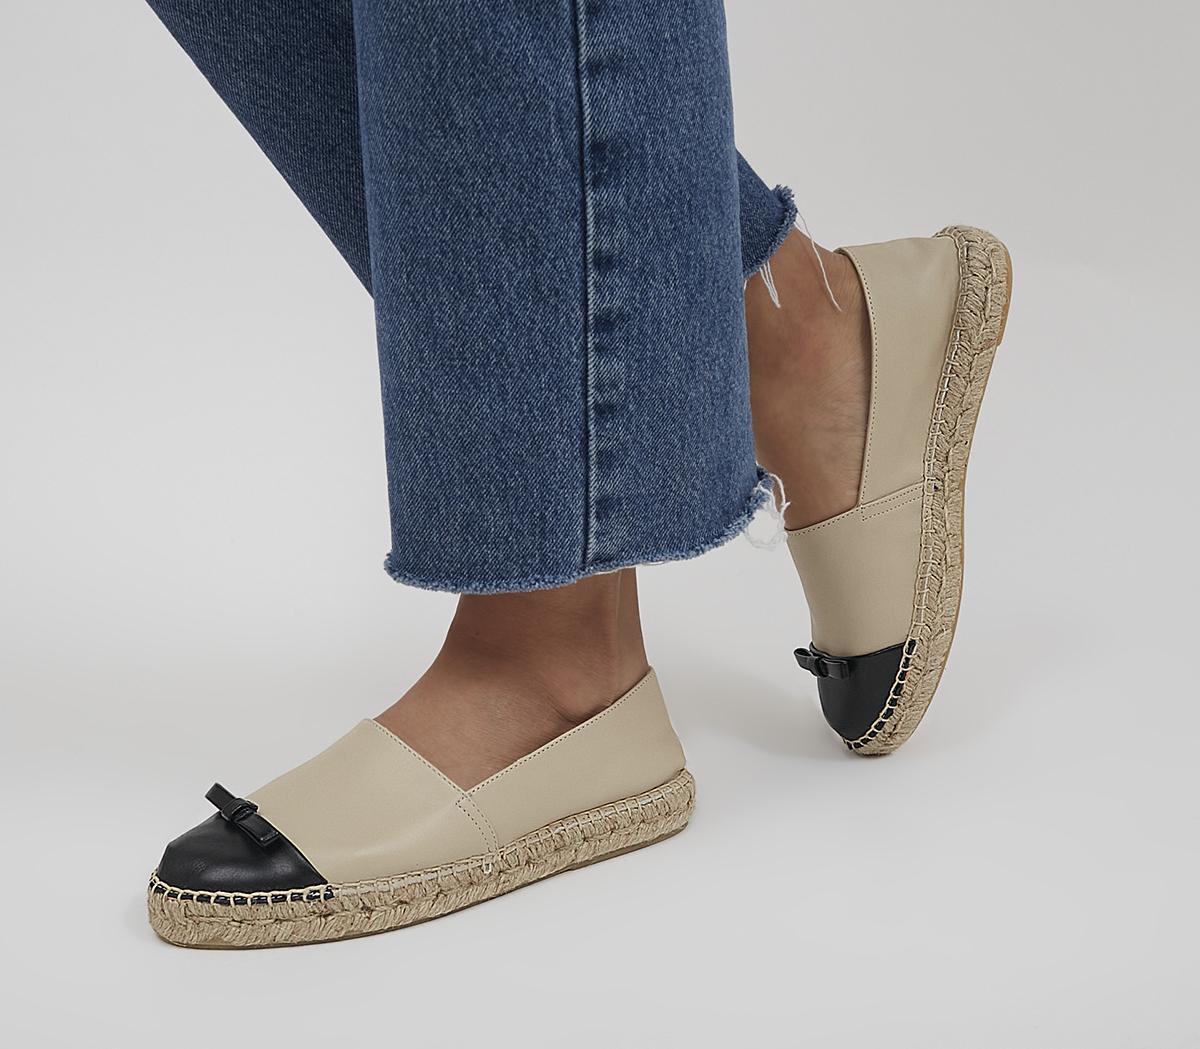 OfficeFoal Bow Toe Cap EspadrillesNude And Black Leather Mix